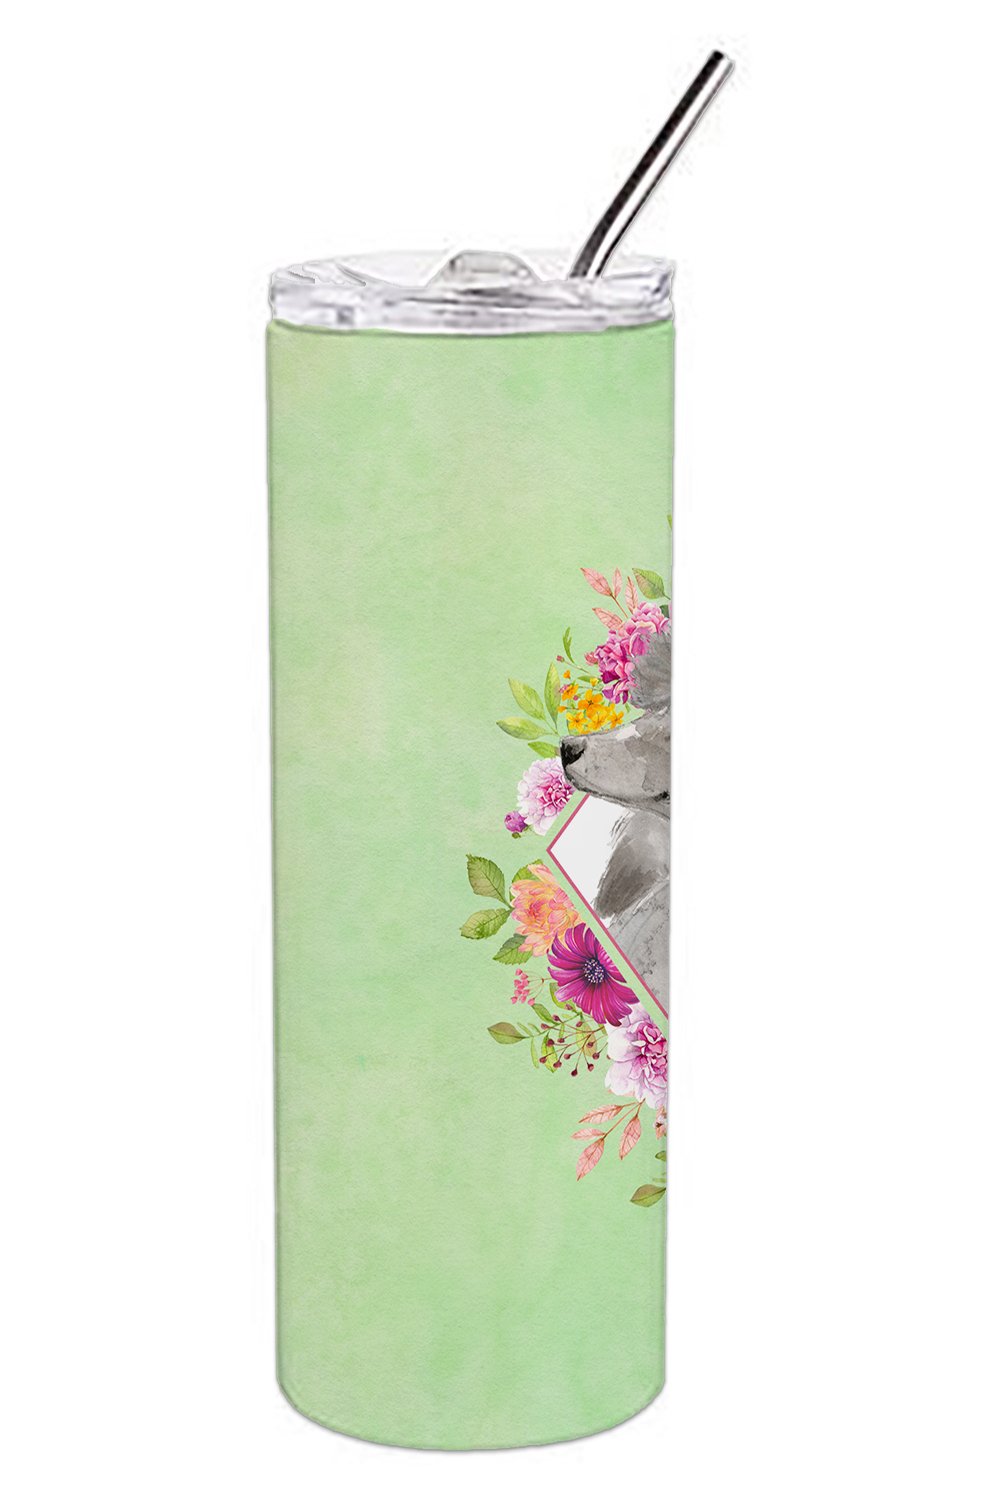 Grey Standard Poodle Green Flowers Double Walled Stainless Steel 20 oz Skinny Tumbler CK4393TBL20 by Caroline's Treasures